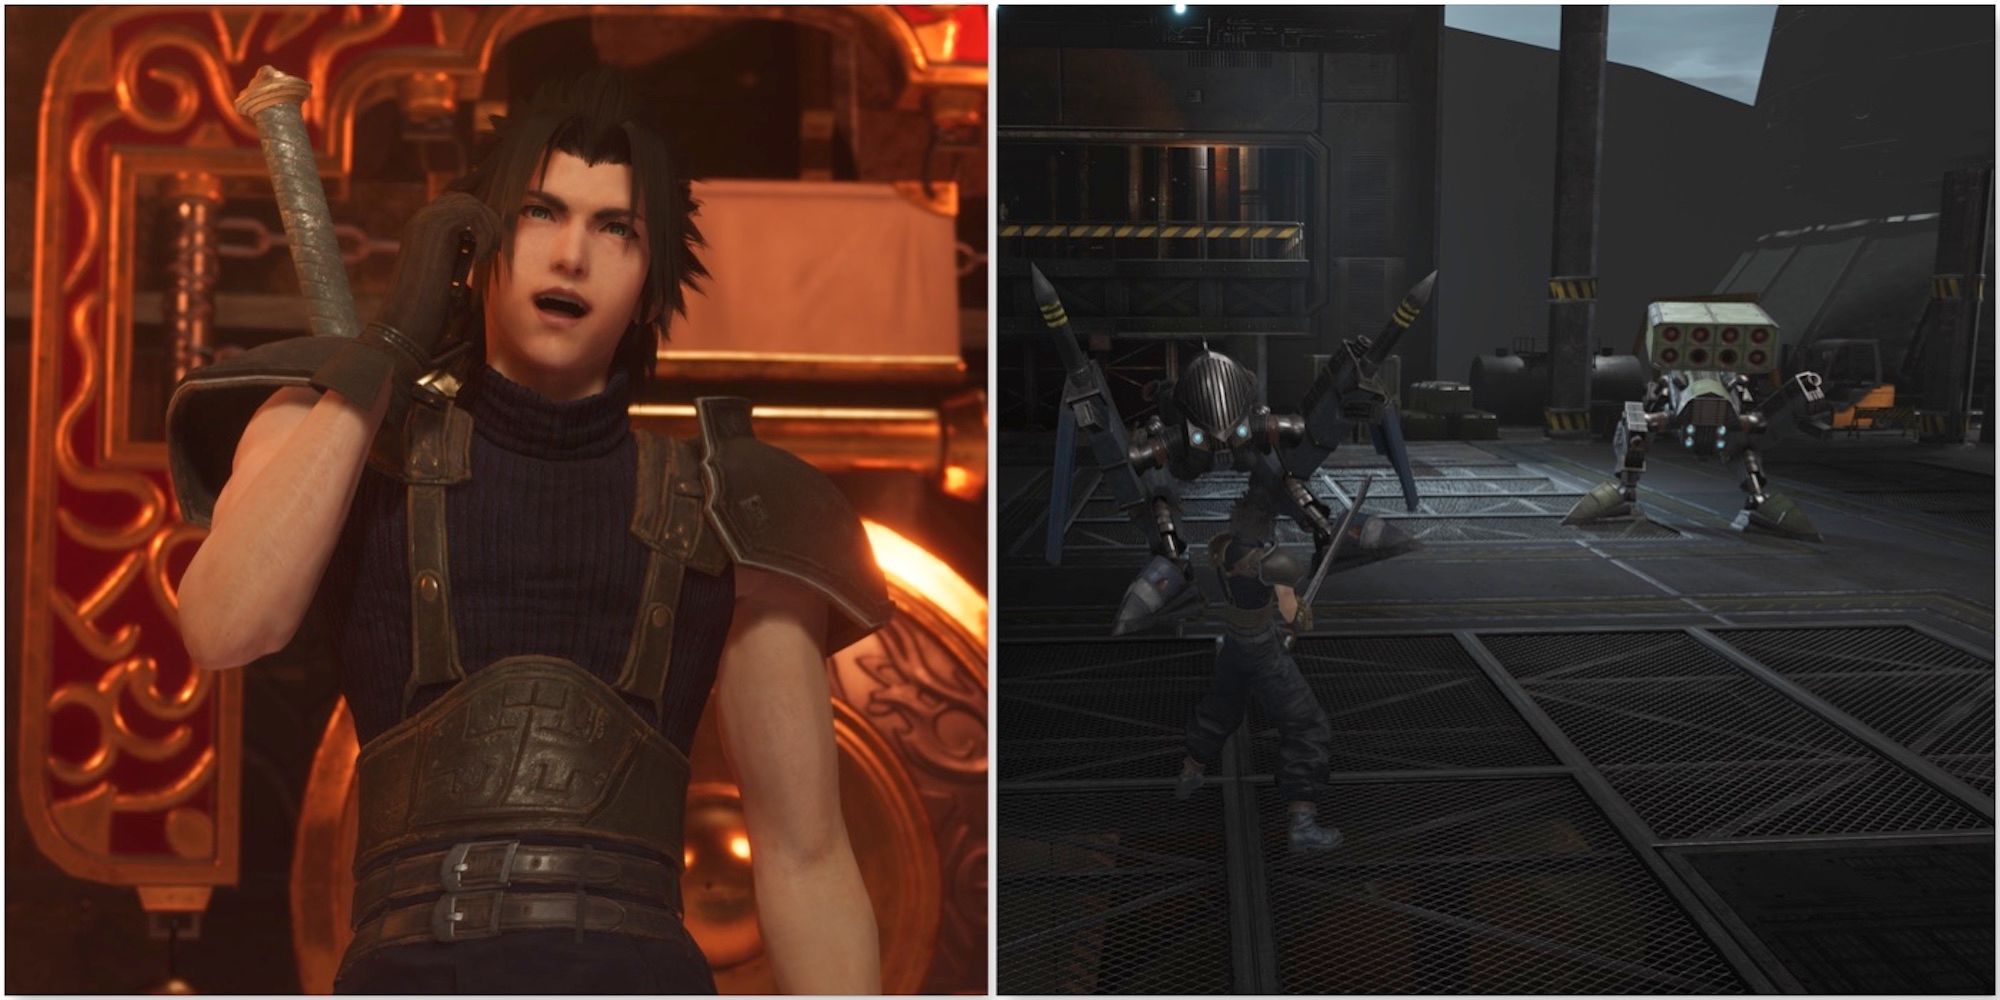 Zack and fighting enemies in Crisis Core Final Fantasy VII Reunion